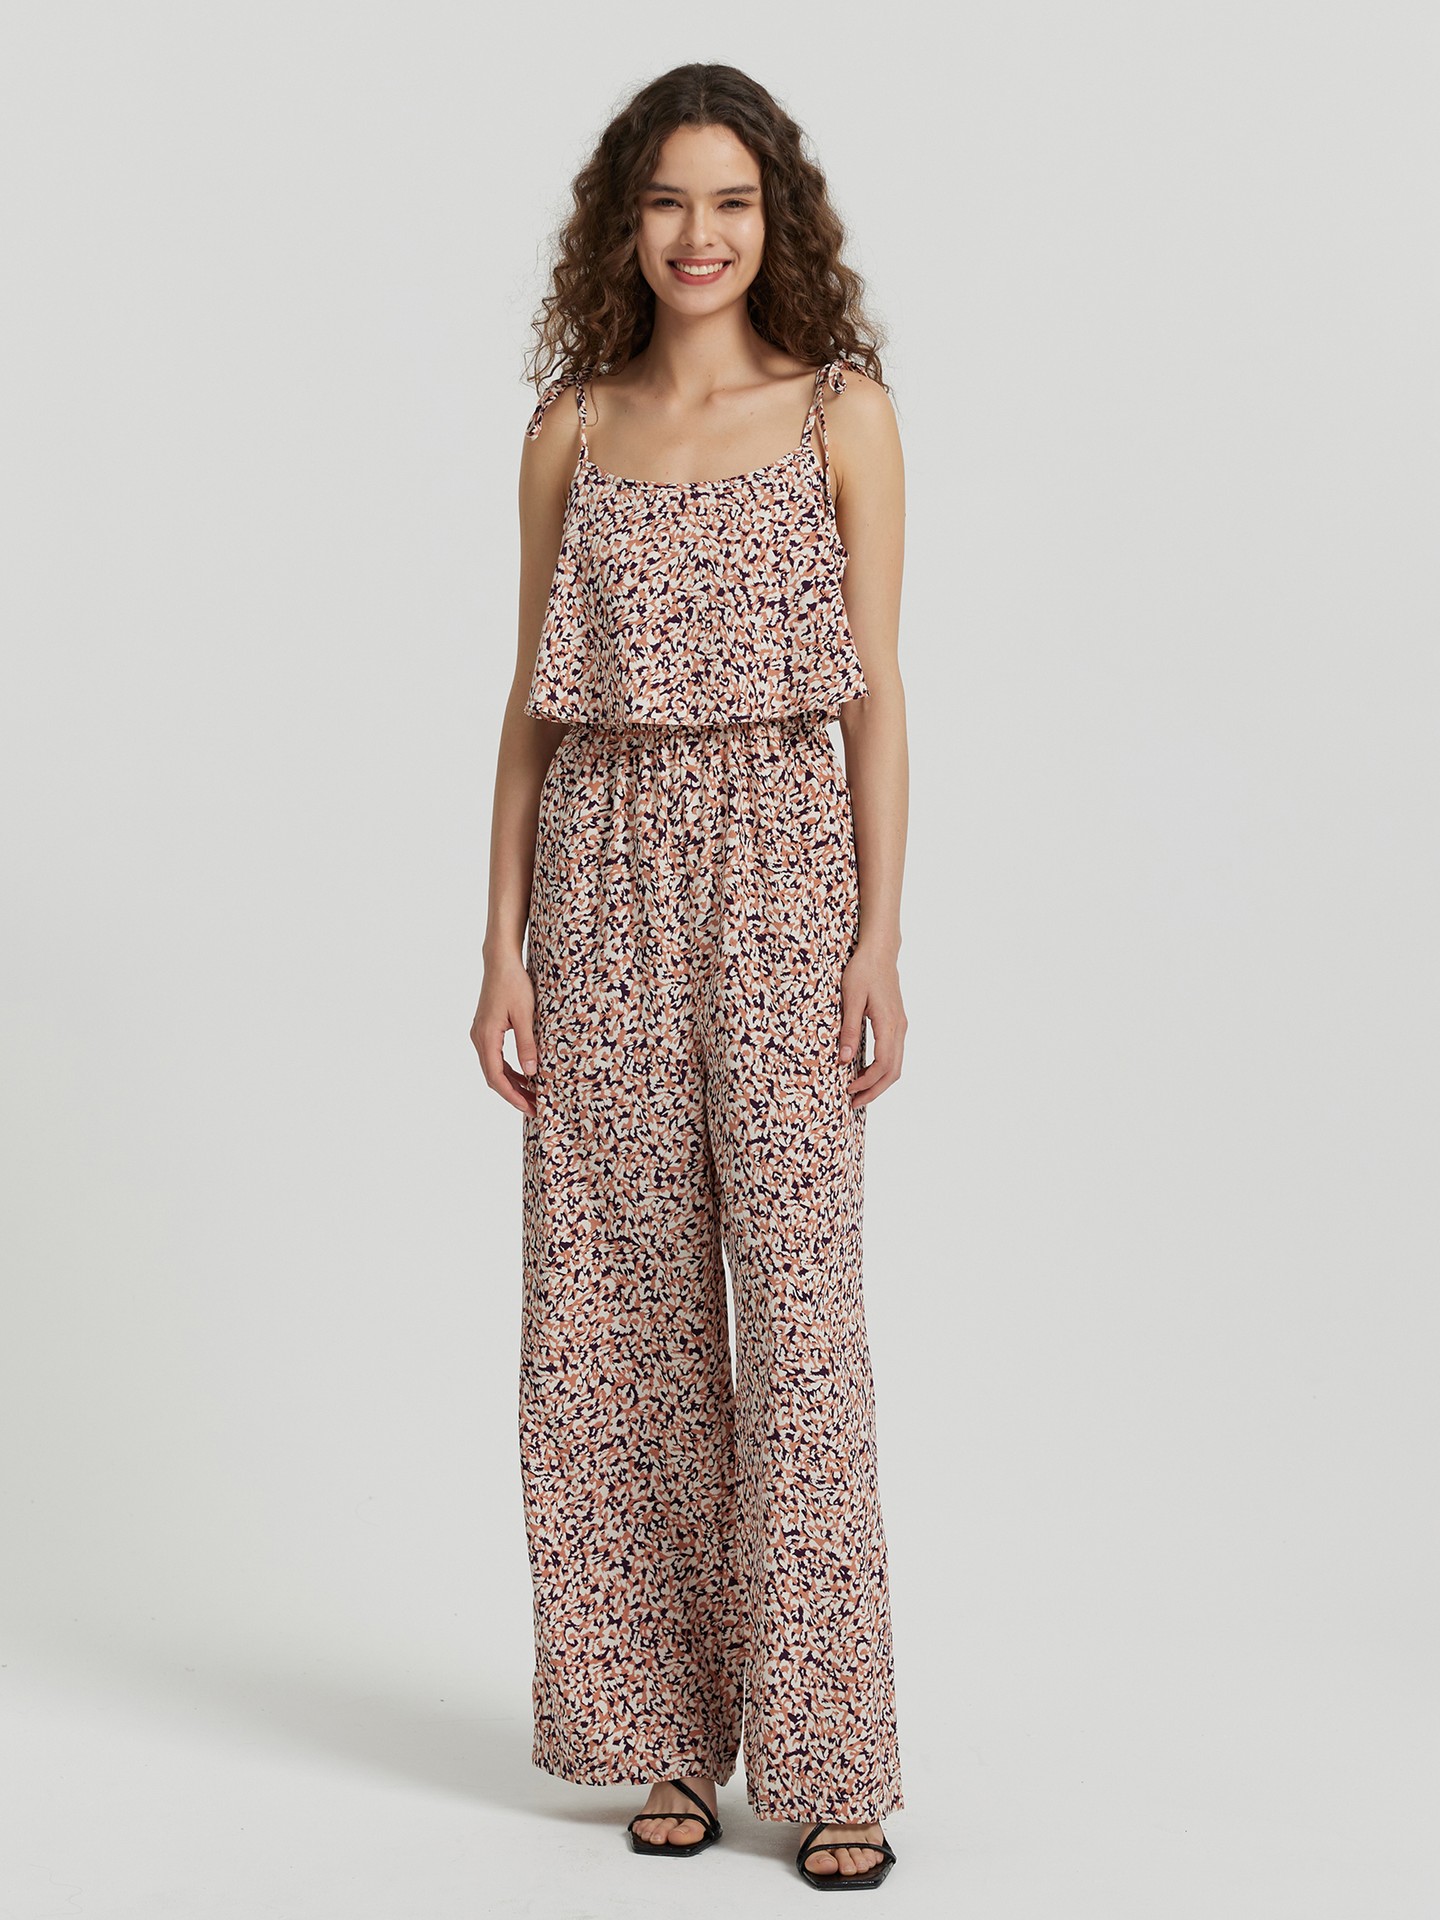  SHOPESSA Womens Jumpsuits Casual Floral Summer